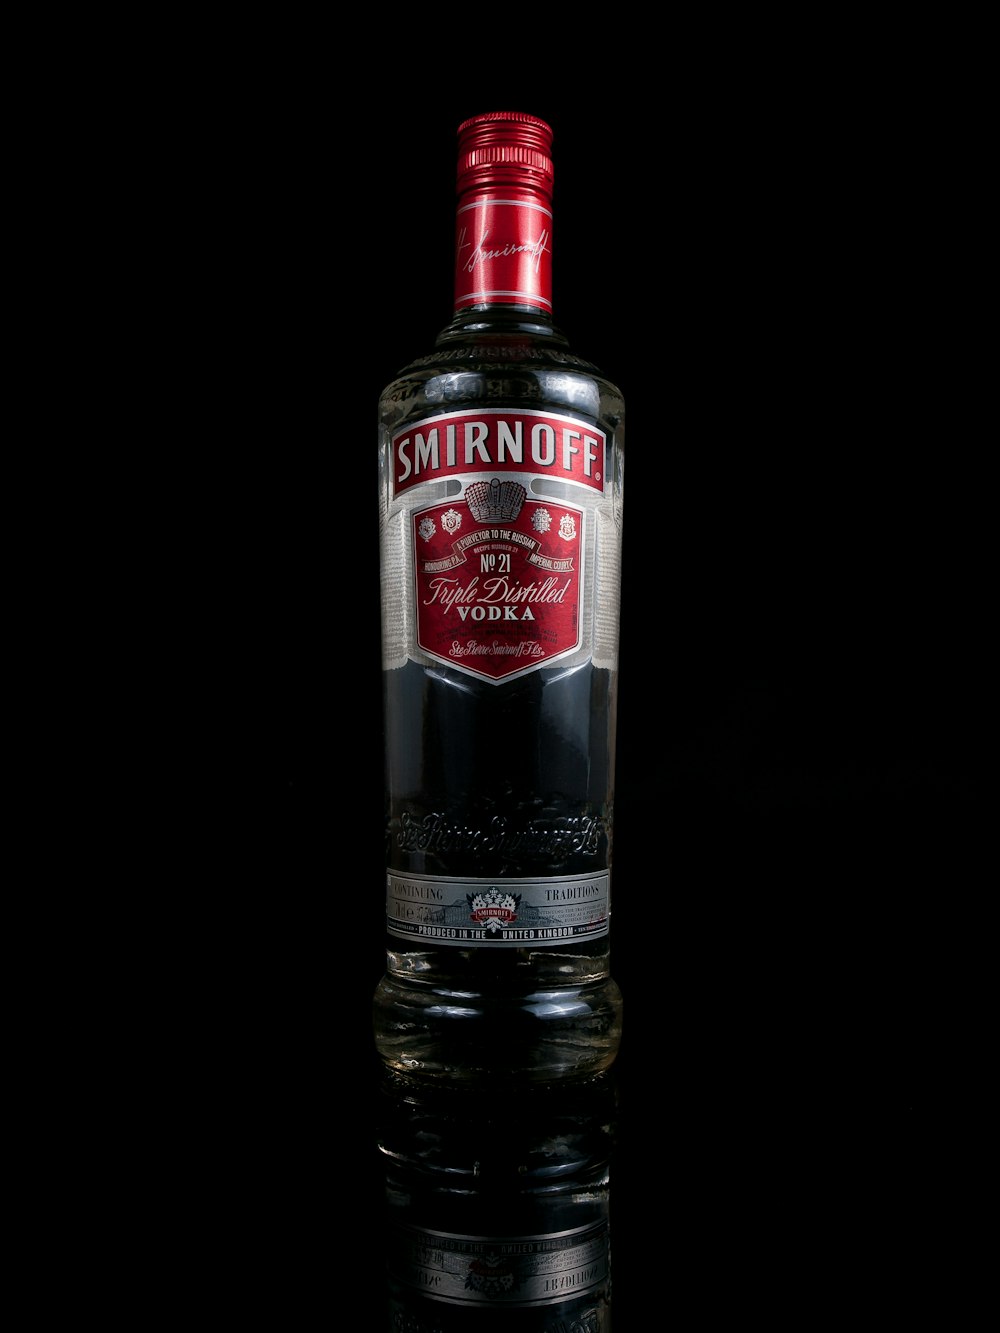 a bottle of smirnoff on a reflective surface